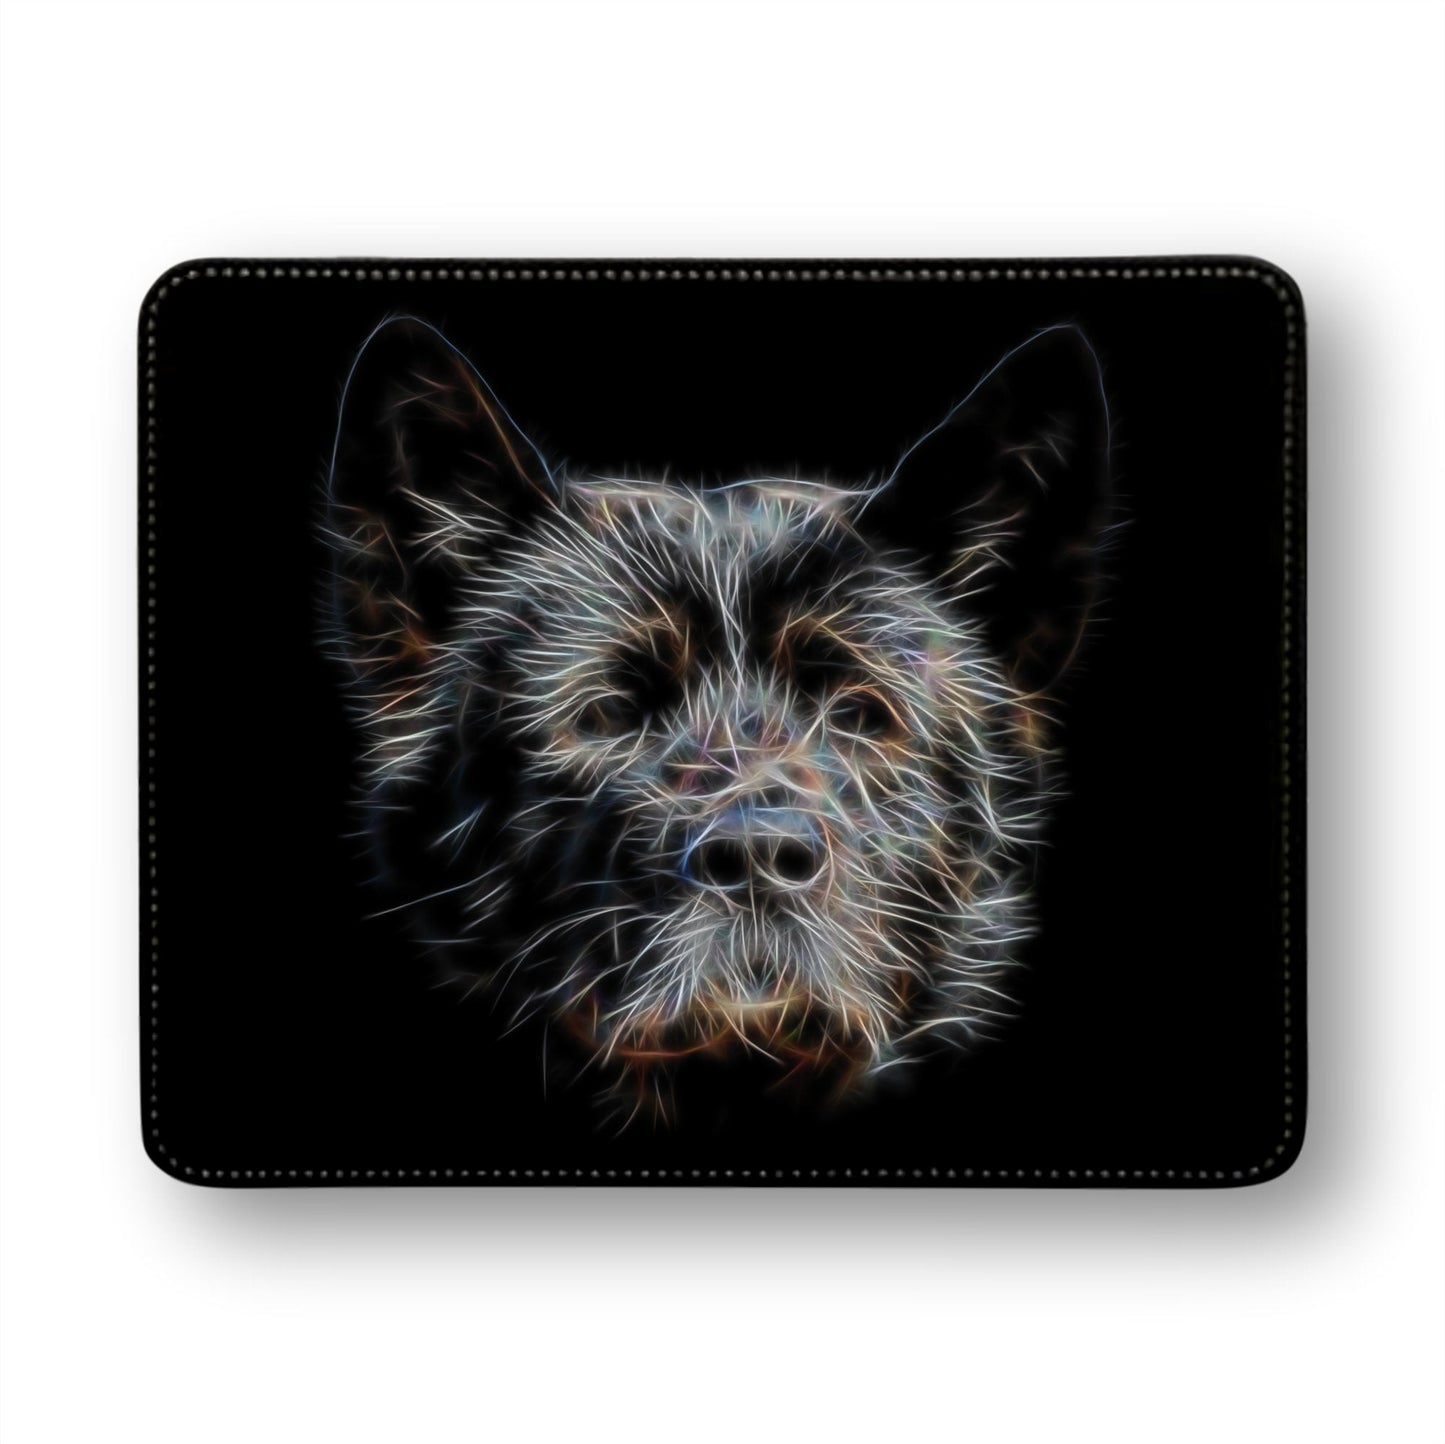 Black American Akita Fractal Art Metal Wall Plaque. Also available as Mouse Pad, Keychain or Coaster.